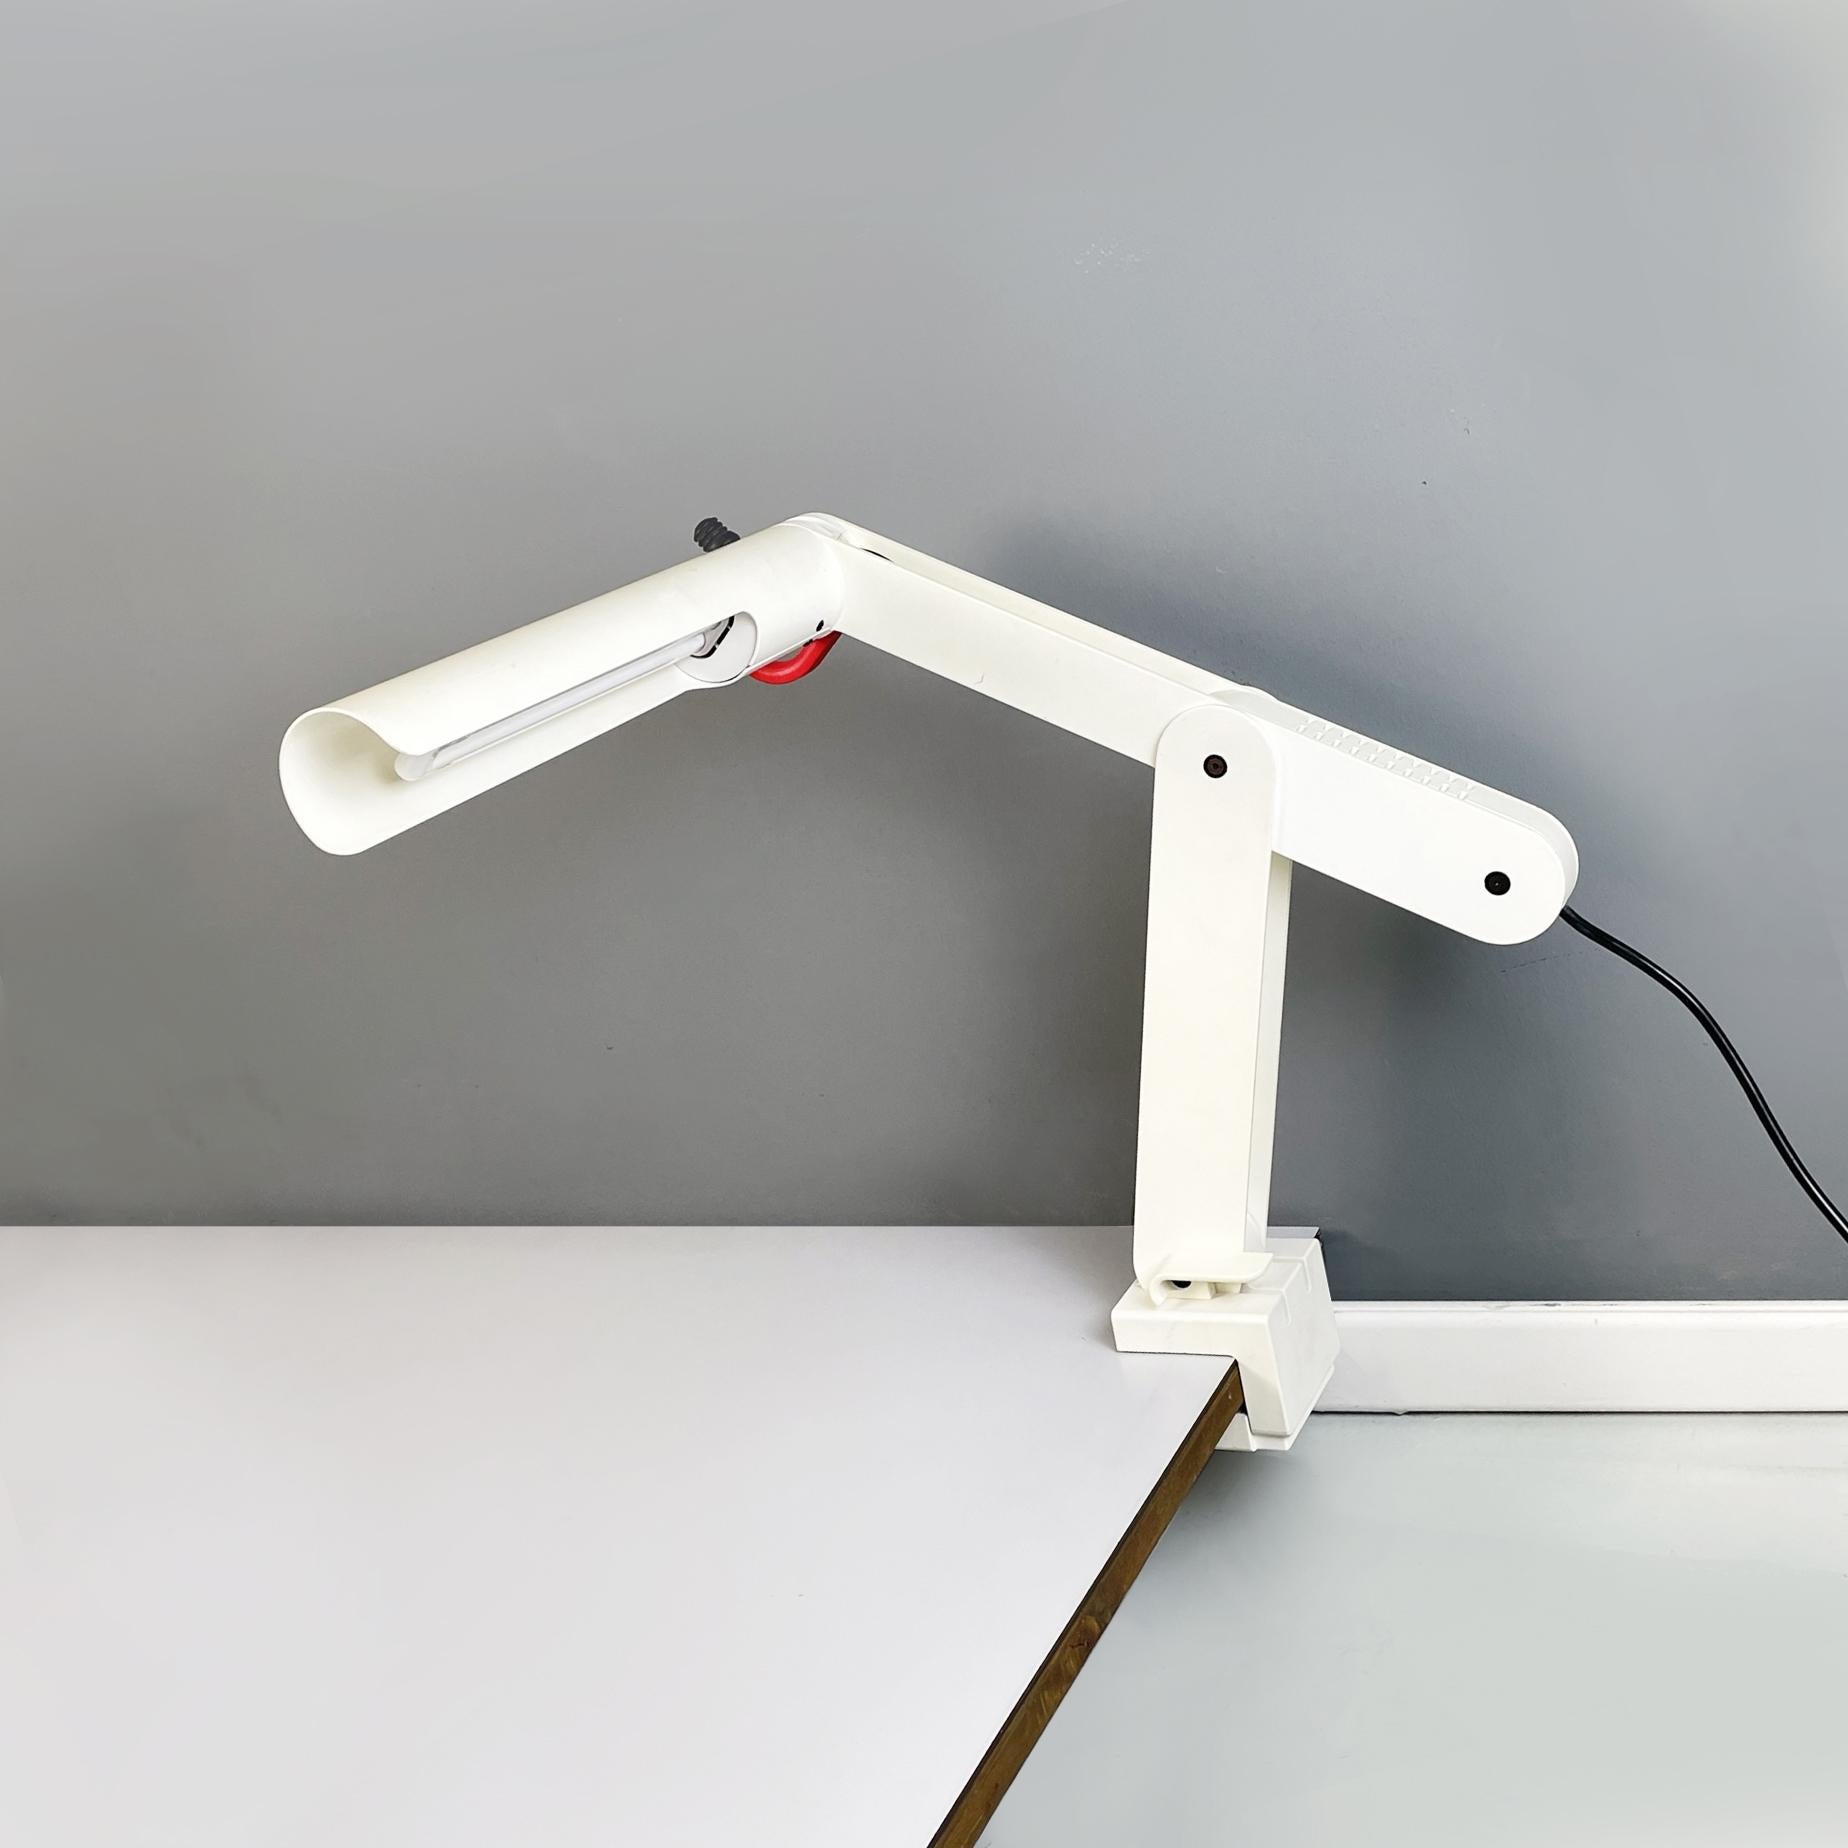 Italian modern Adjustable white metal table lamp with clamp, 1980s
Adjustable metal table lamp. The cylindrical diffuser is in white metal with a red plastic handle. The lamp has one arm with a free body and the other movable through a knob. At the